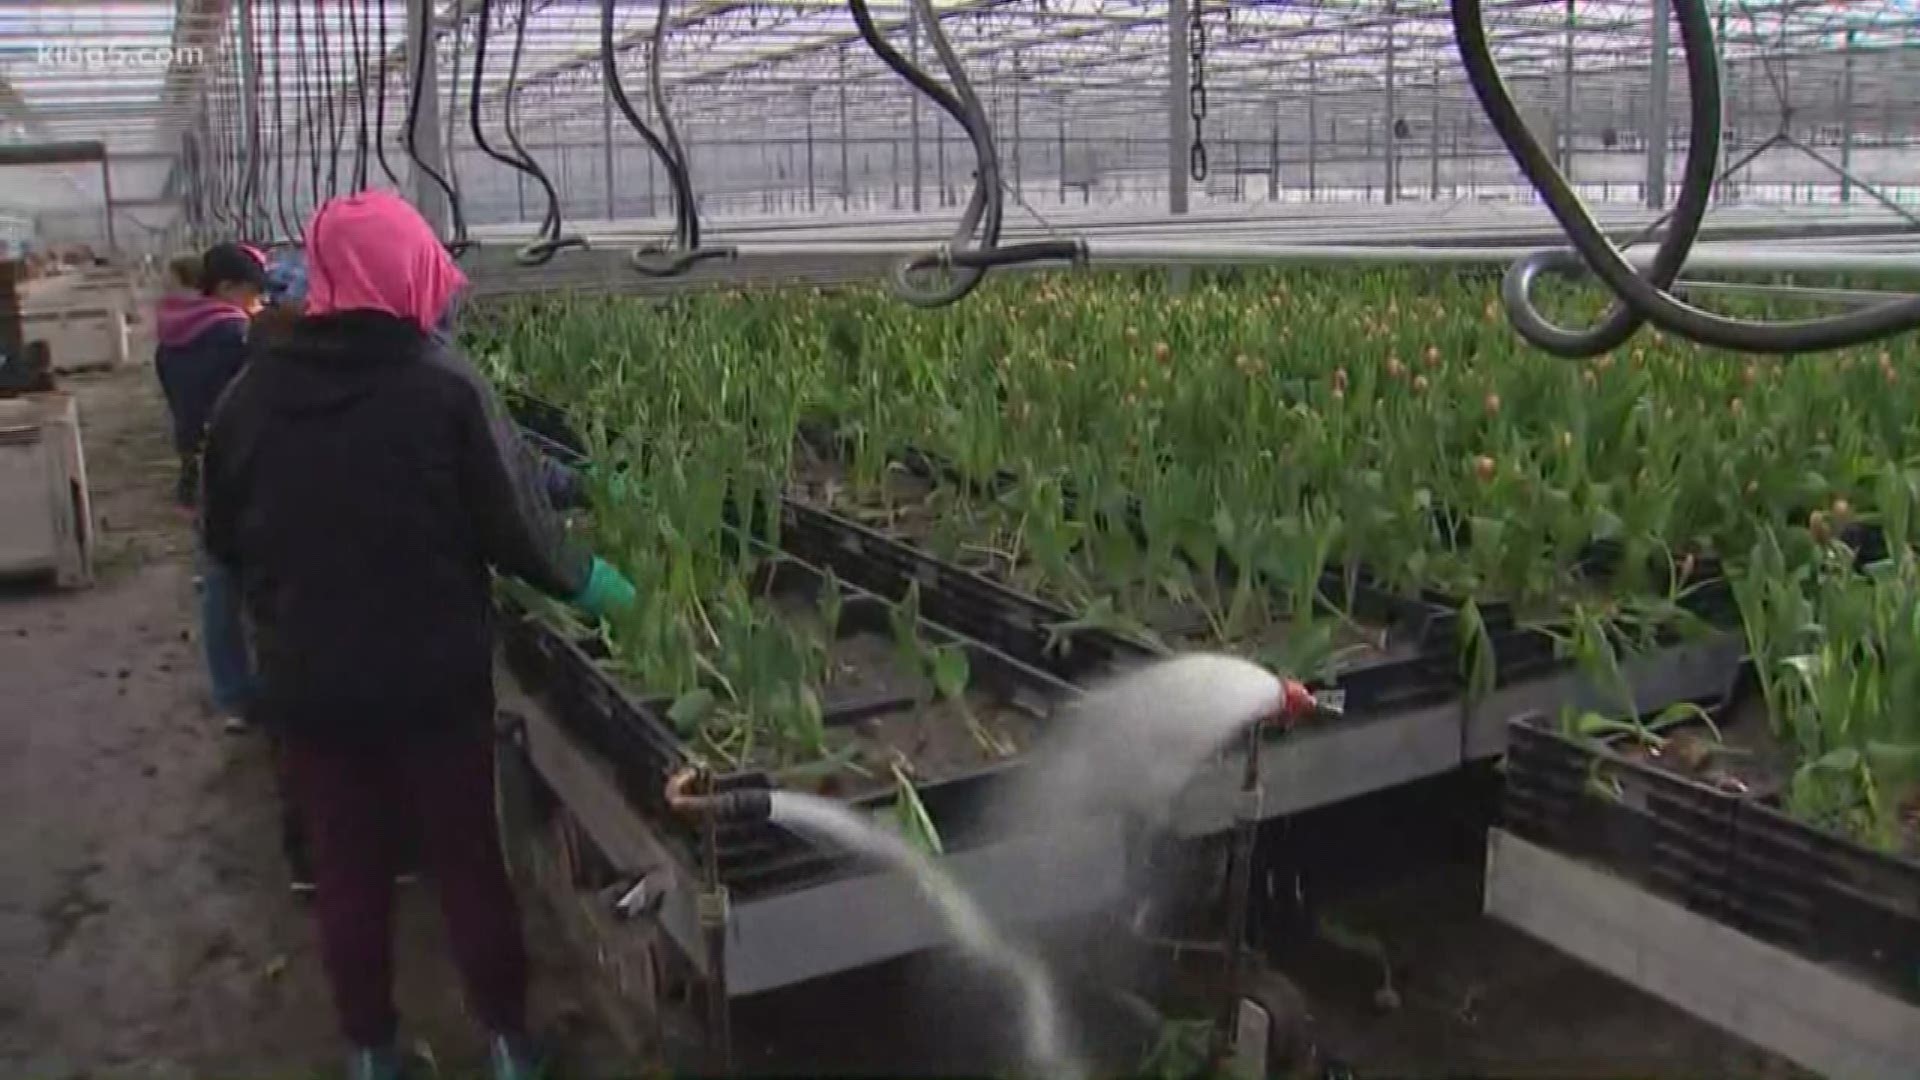 Now that the annual Tulip festival in Skagit County is over what happens to the tulips? KING 5's Jordan Wilkerson went inside the greenhouse at RoozenGaarde to find out.